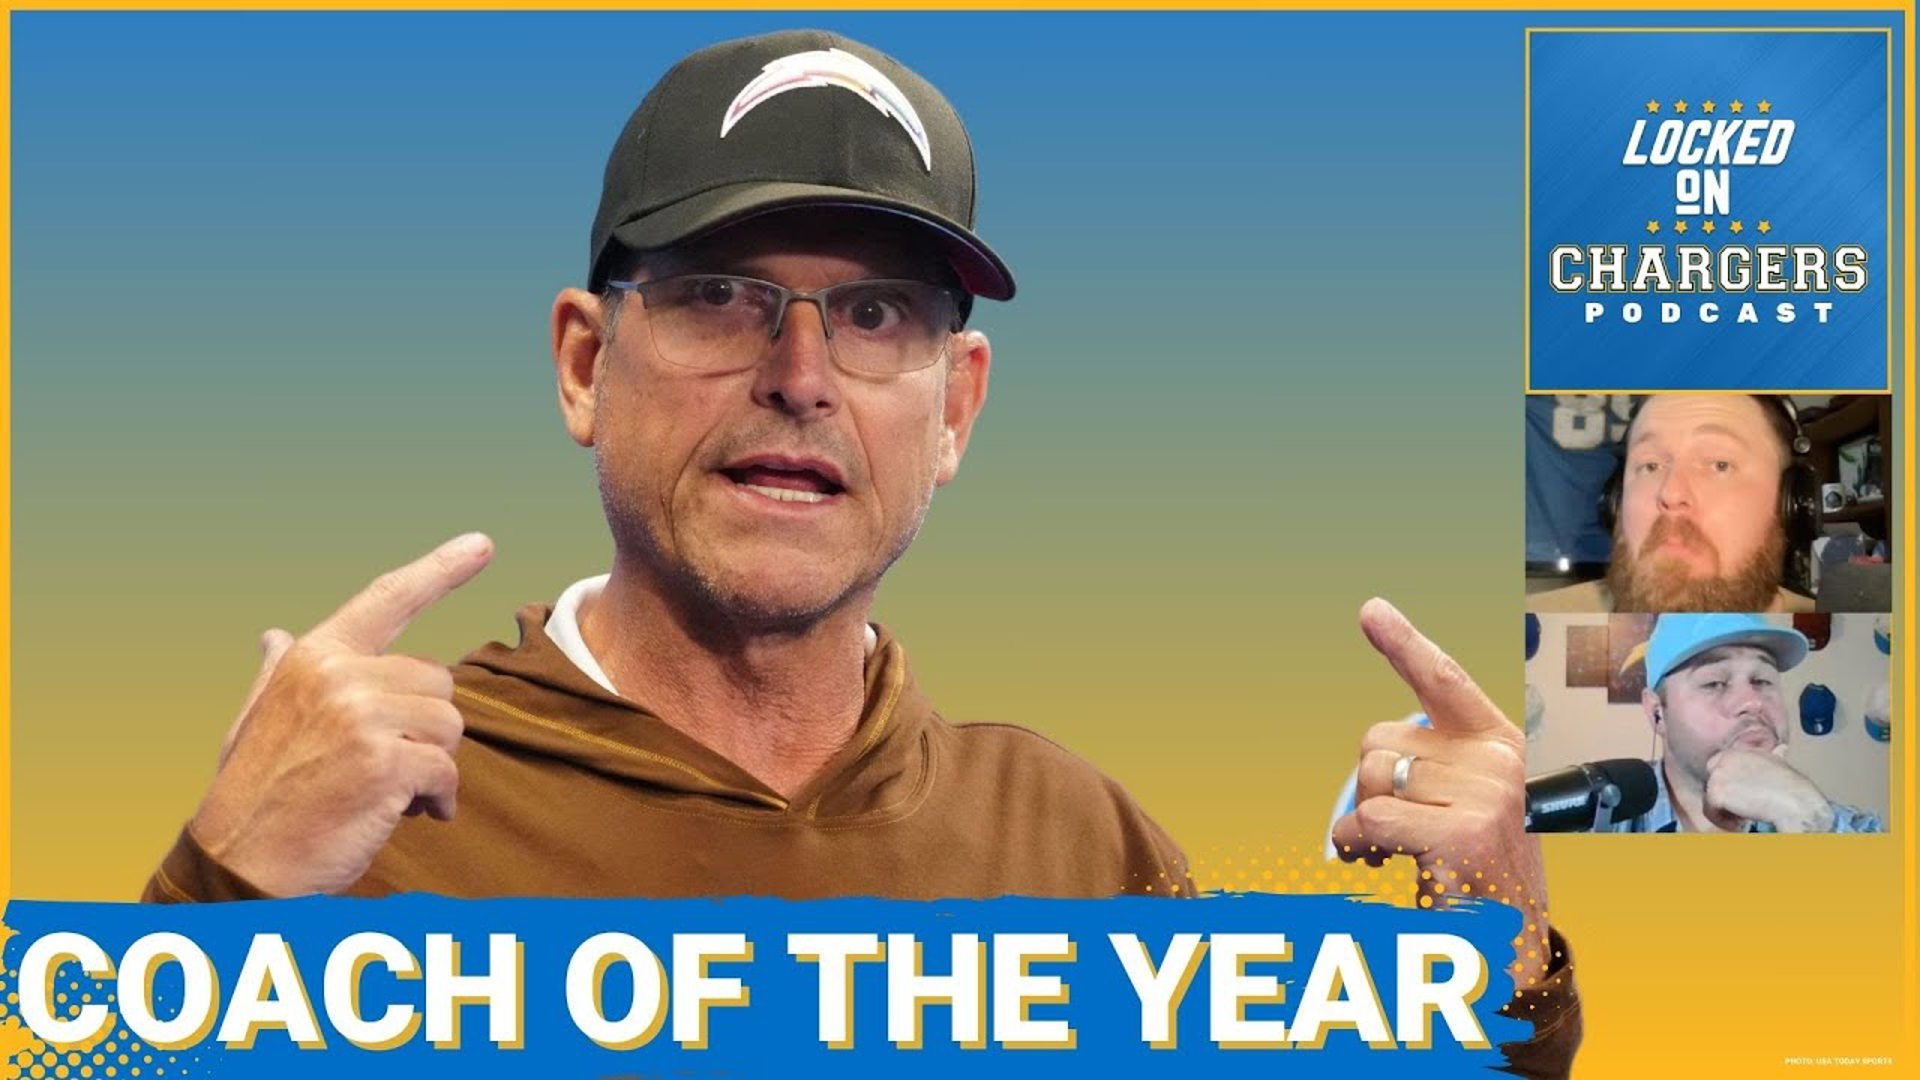 2023 was a disaster for the Chargers, but Jim Harbaugh was brought in to make them a serious team and if he can do it, there's a great chance he could win COTY